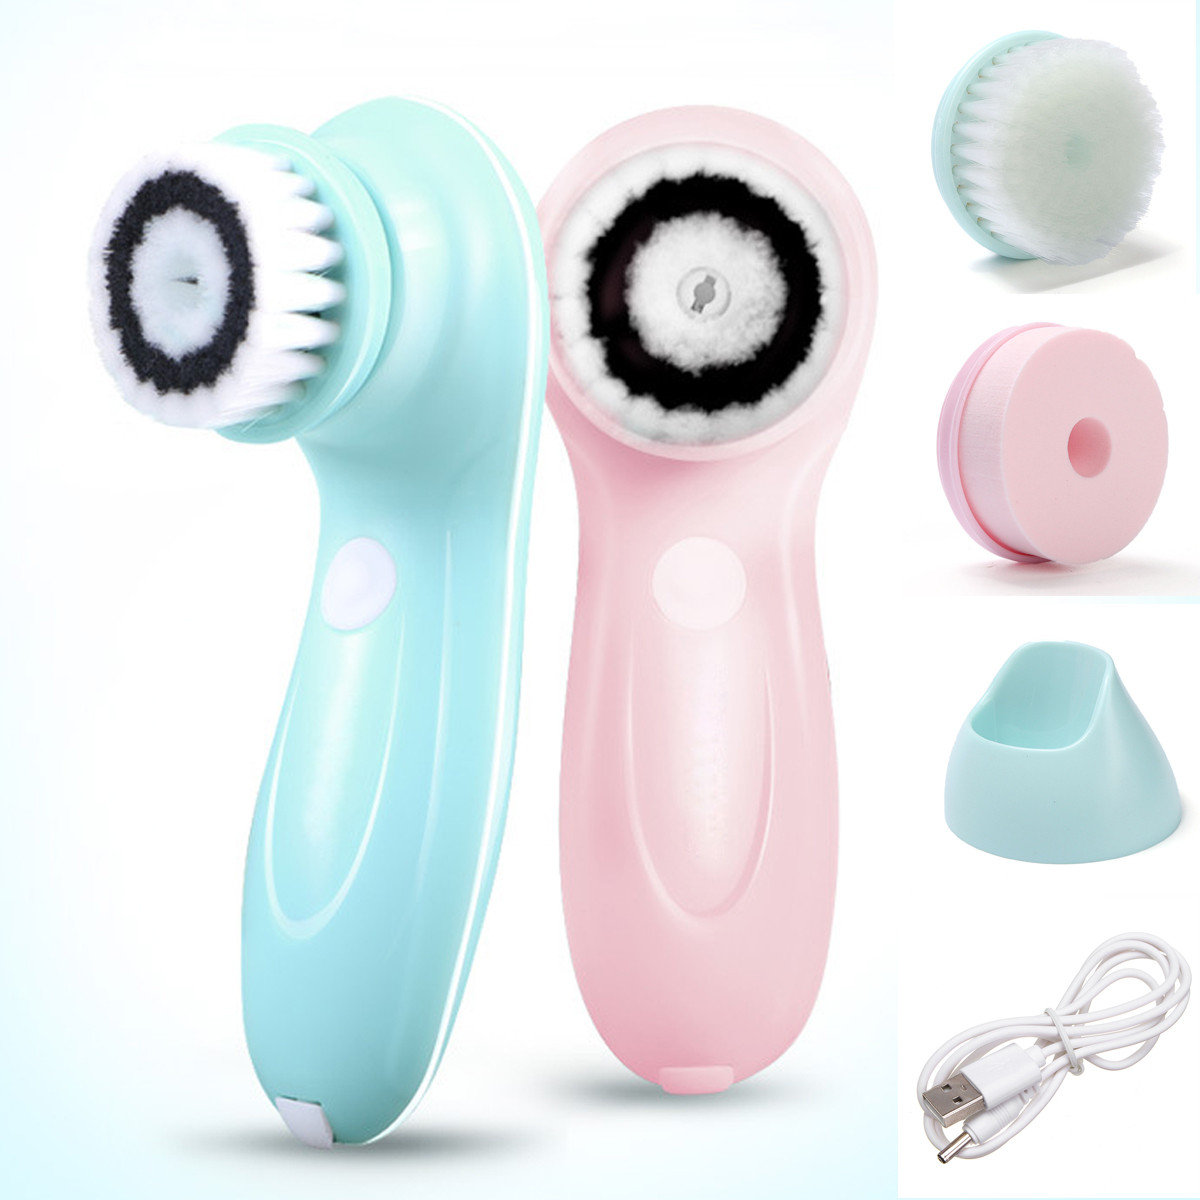 3 In 1 USB Electric Rechargeable Face Cleansing Brush Scrubber Rotating Rotation Facial Care